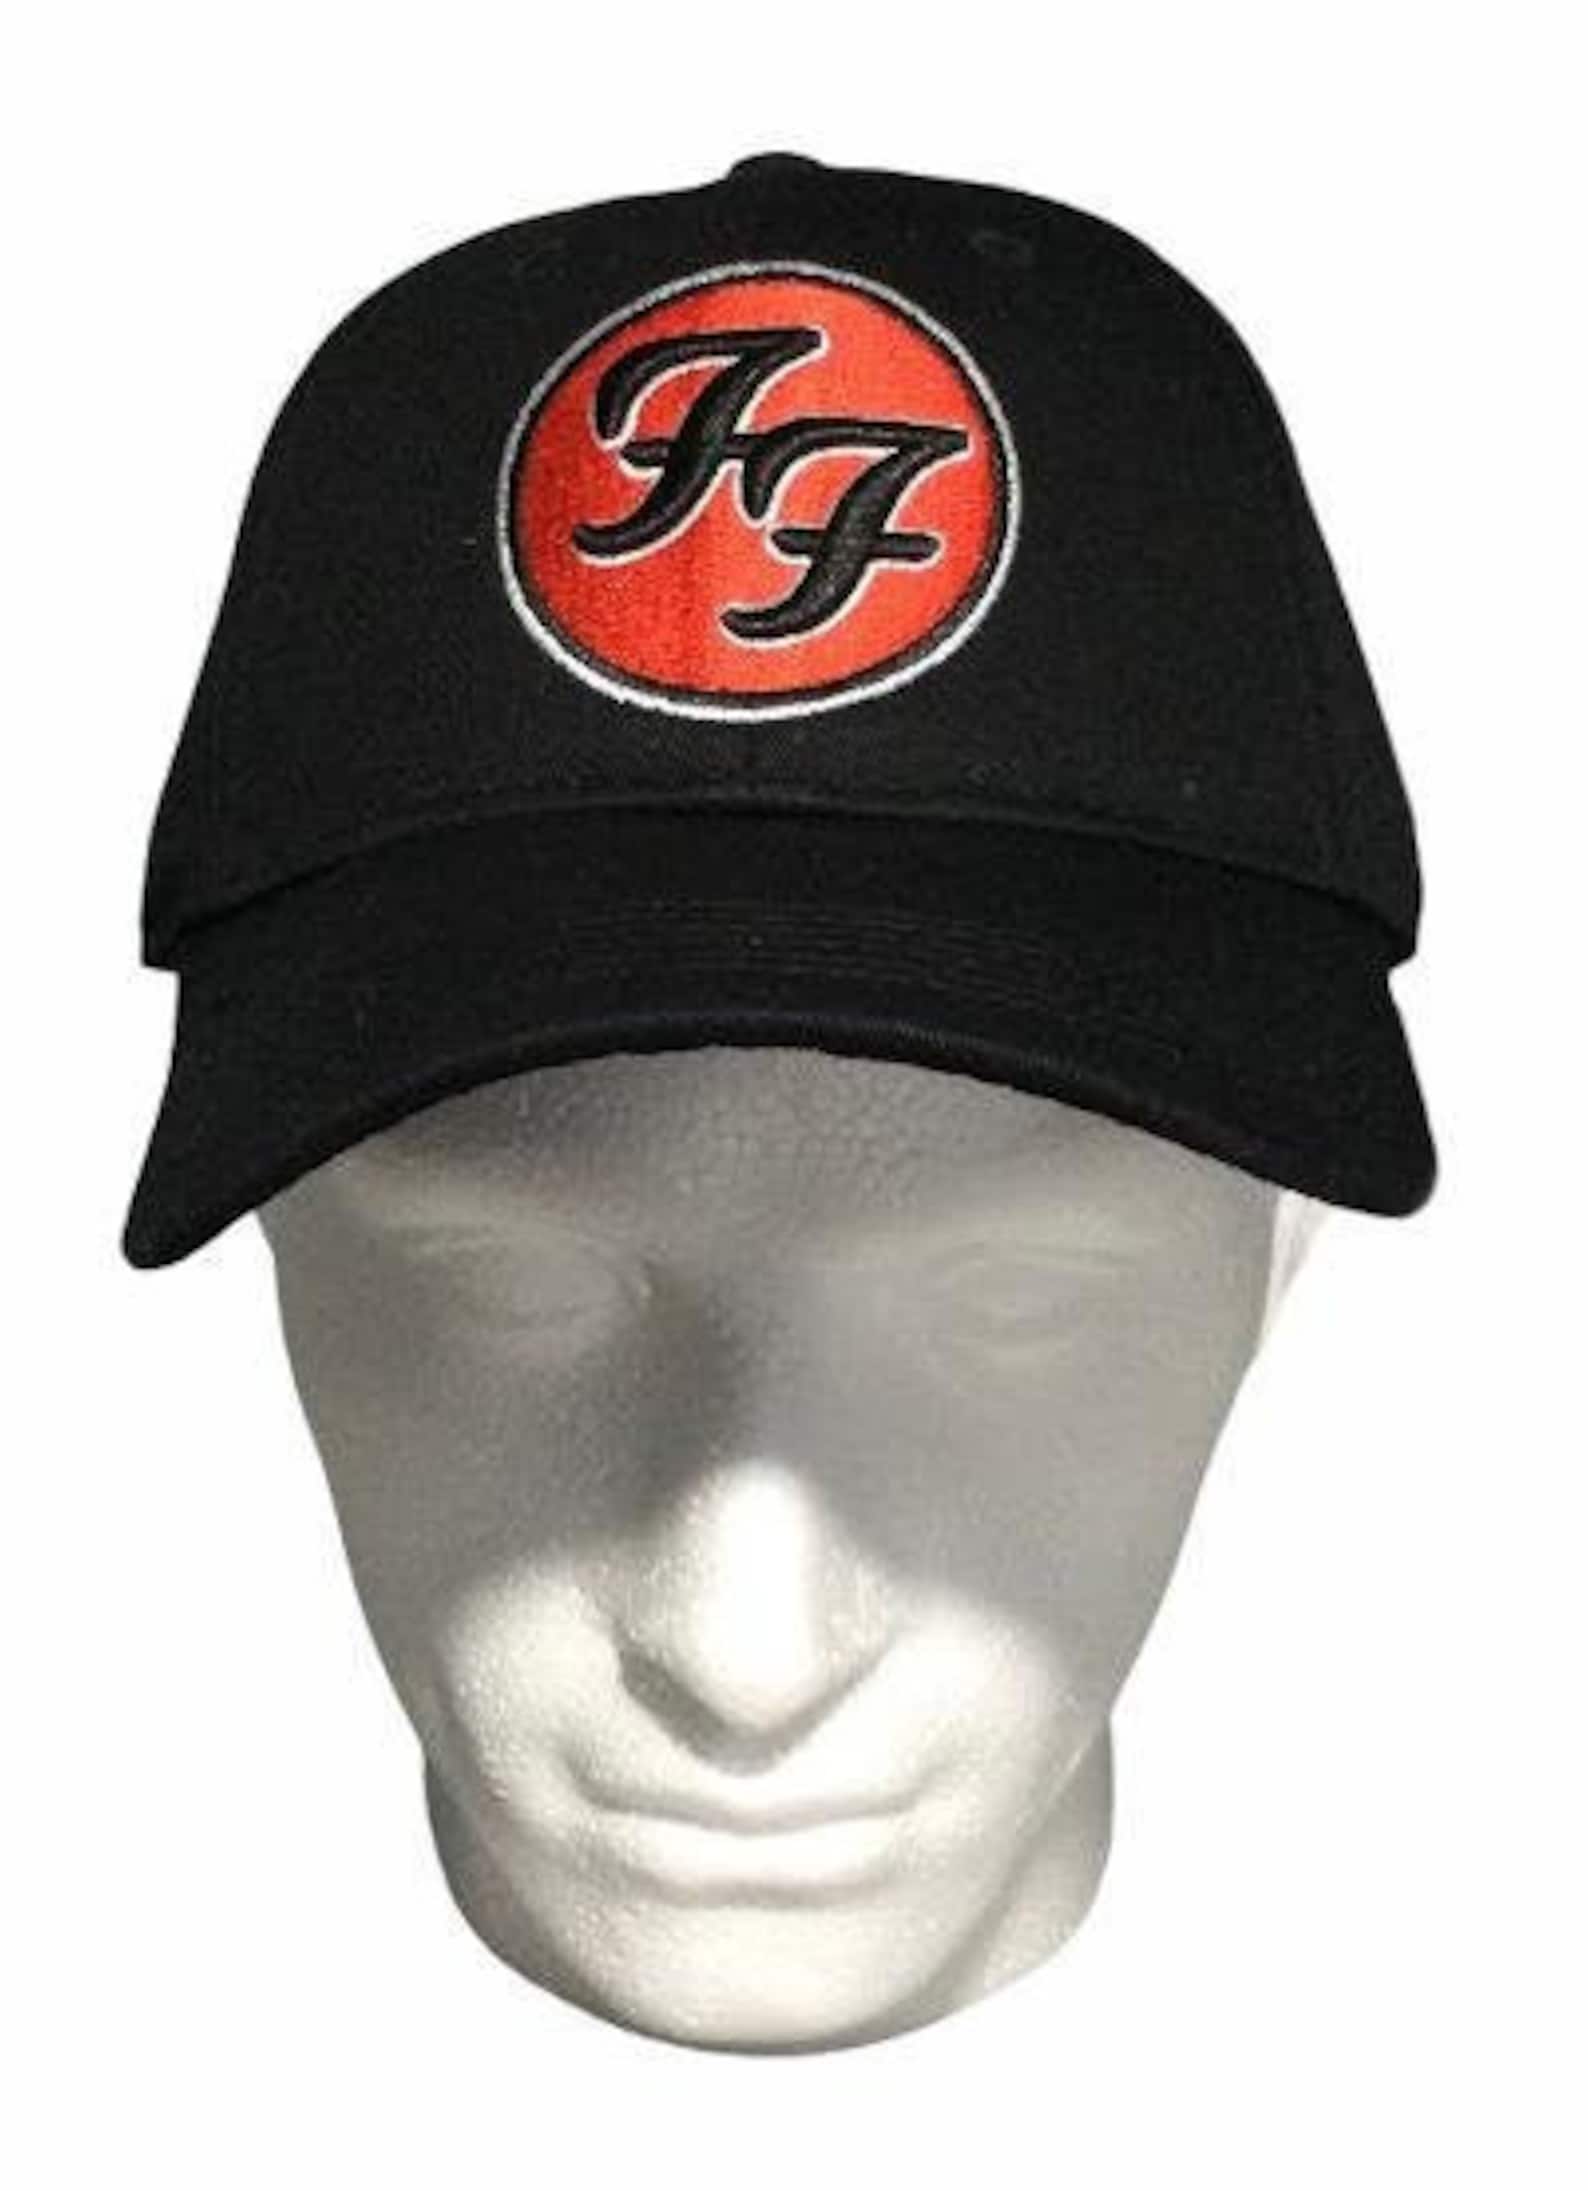 Foo Fighters Baseball Cap Unisex One Size Fits All | Etsy